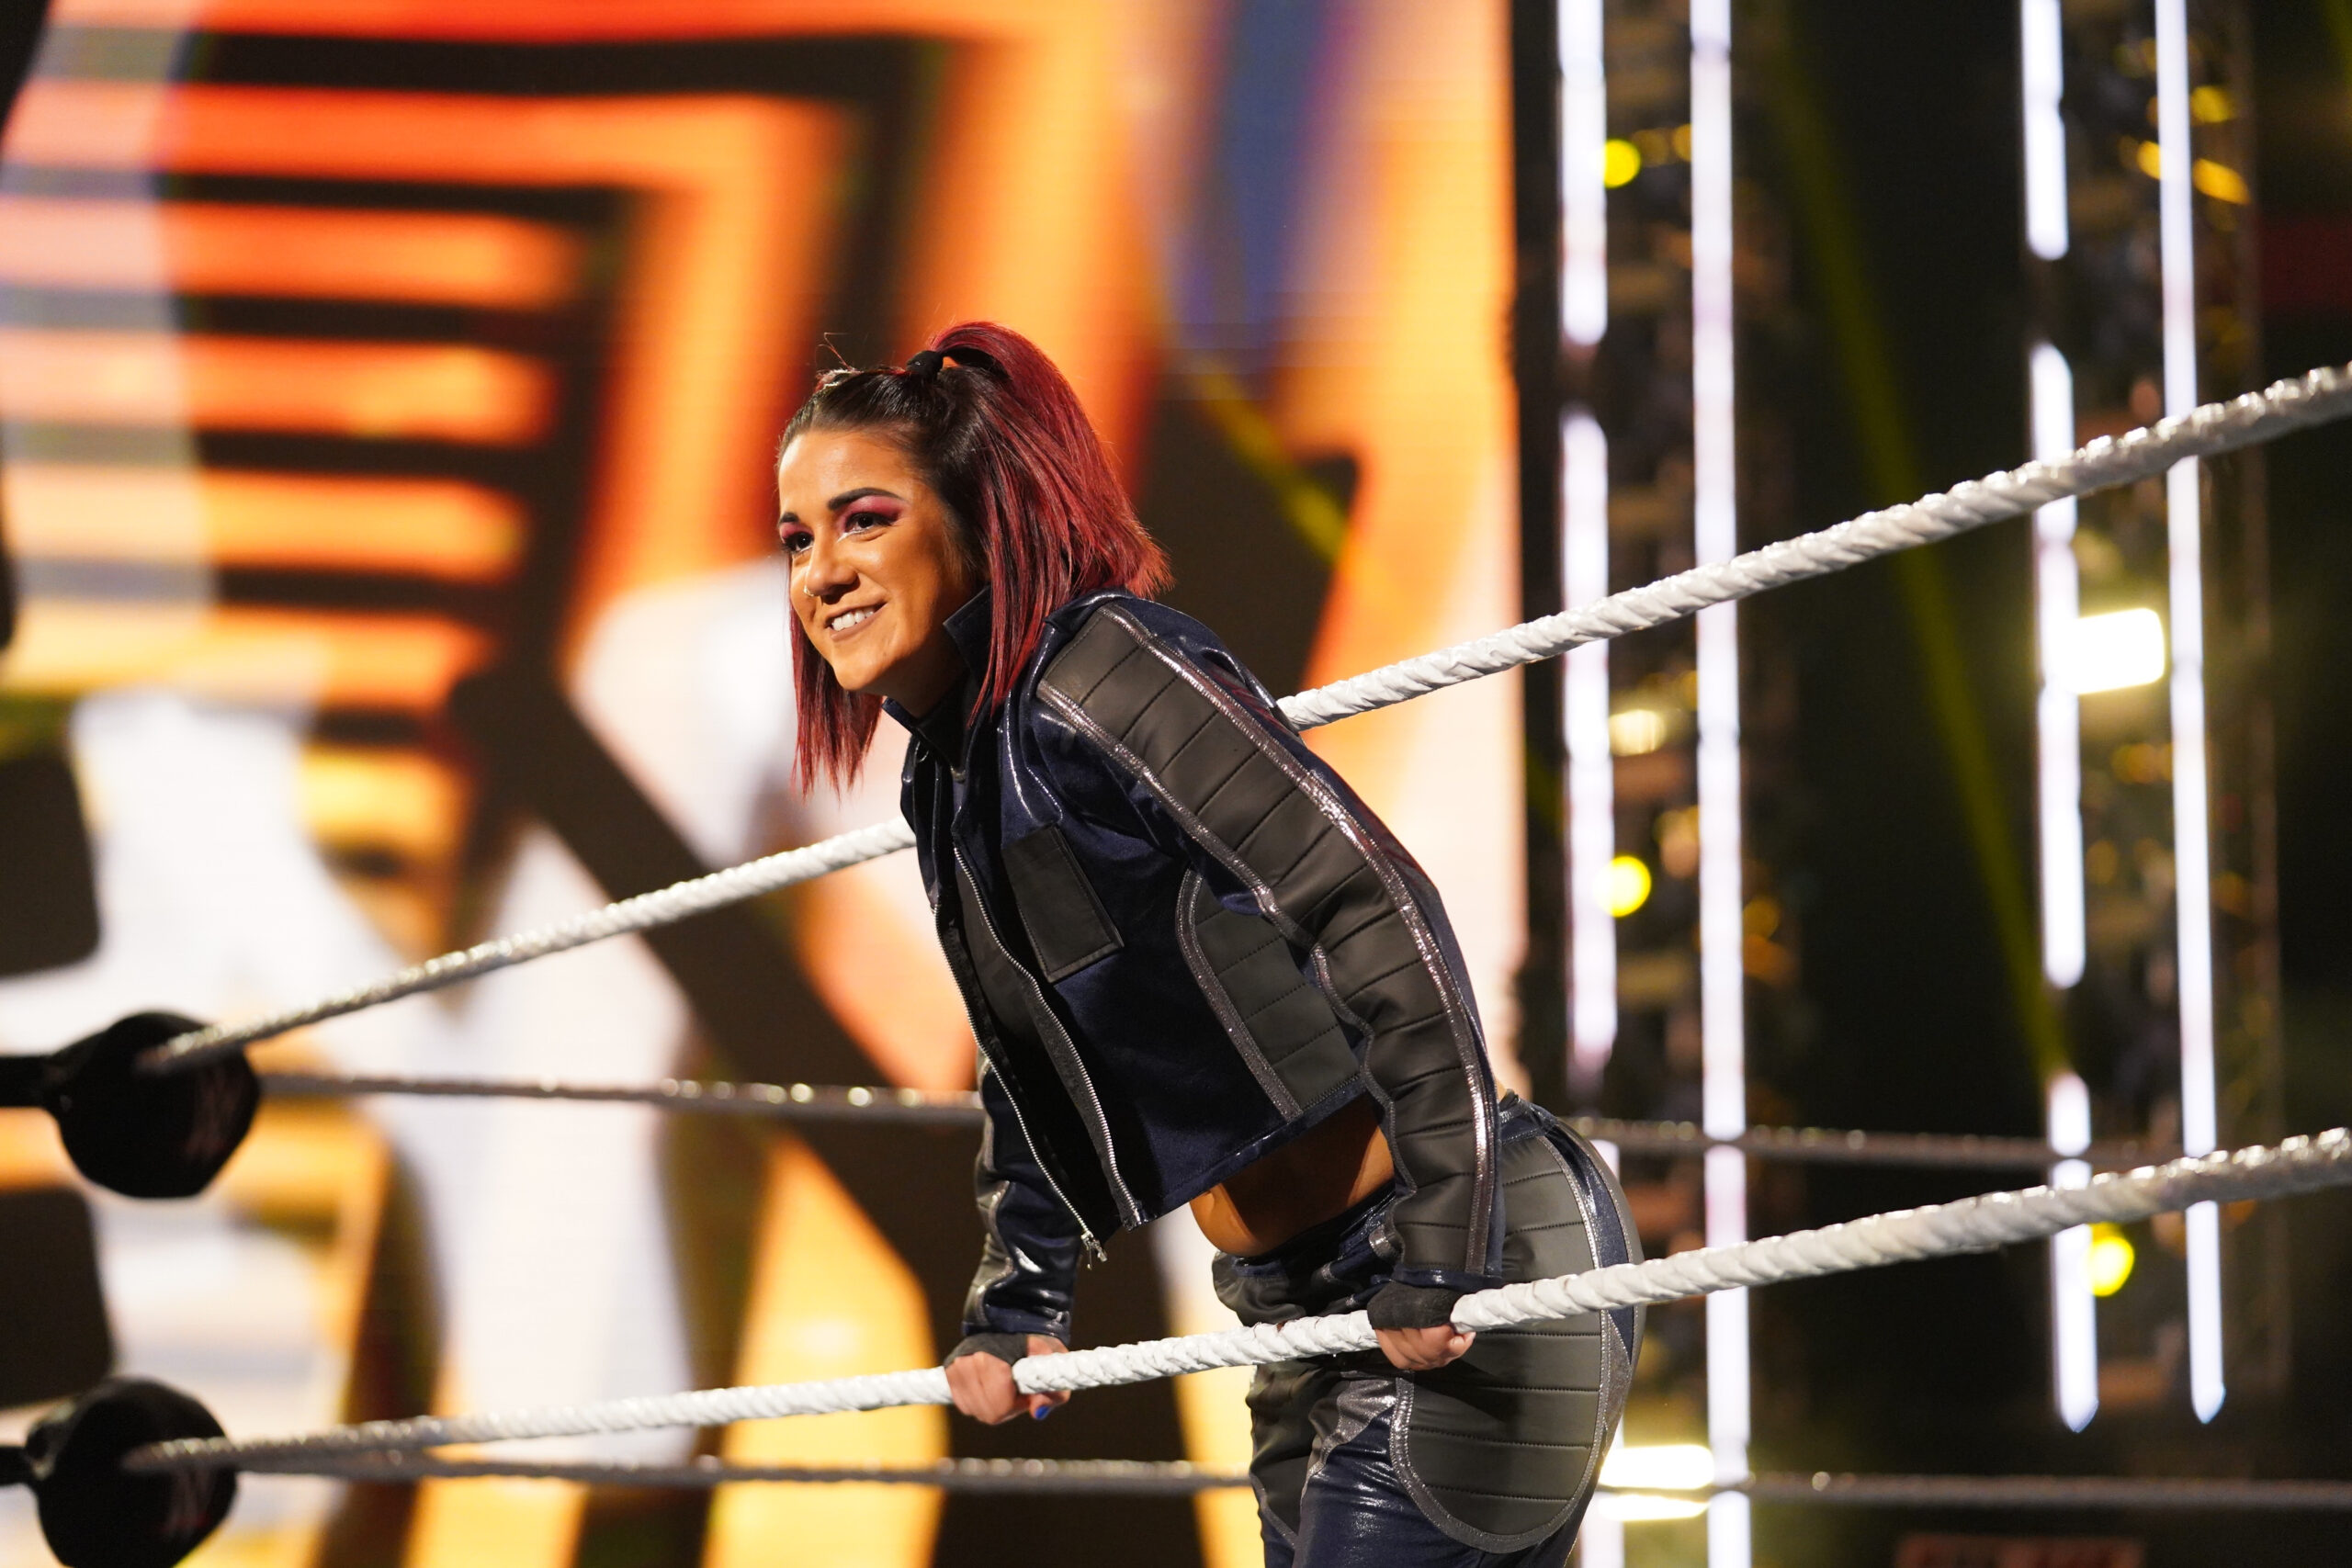 Bayley extends a warm welcome to Jade Cargill as she joins WWE, and Cargill graciously responds.